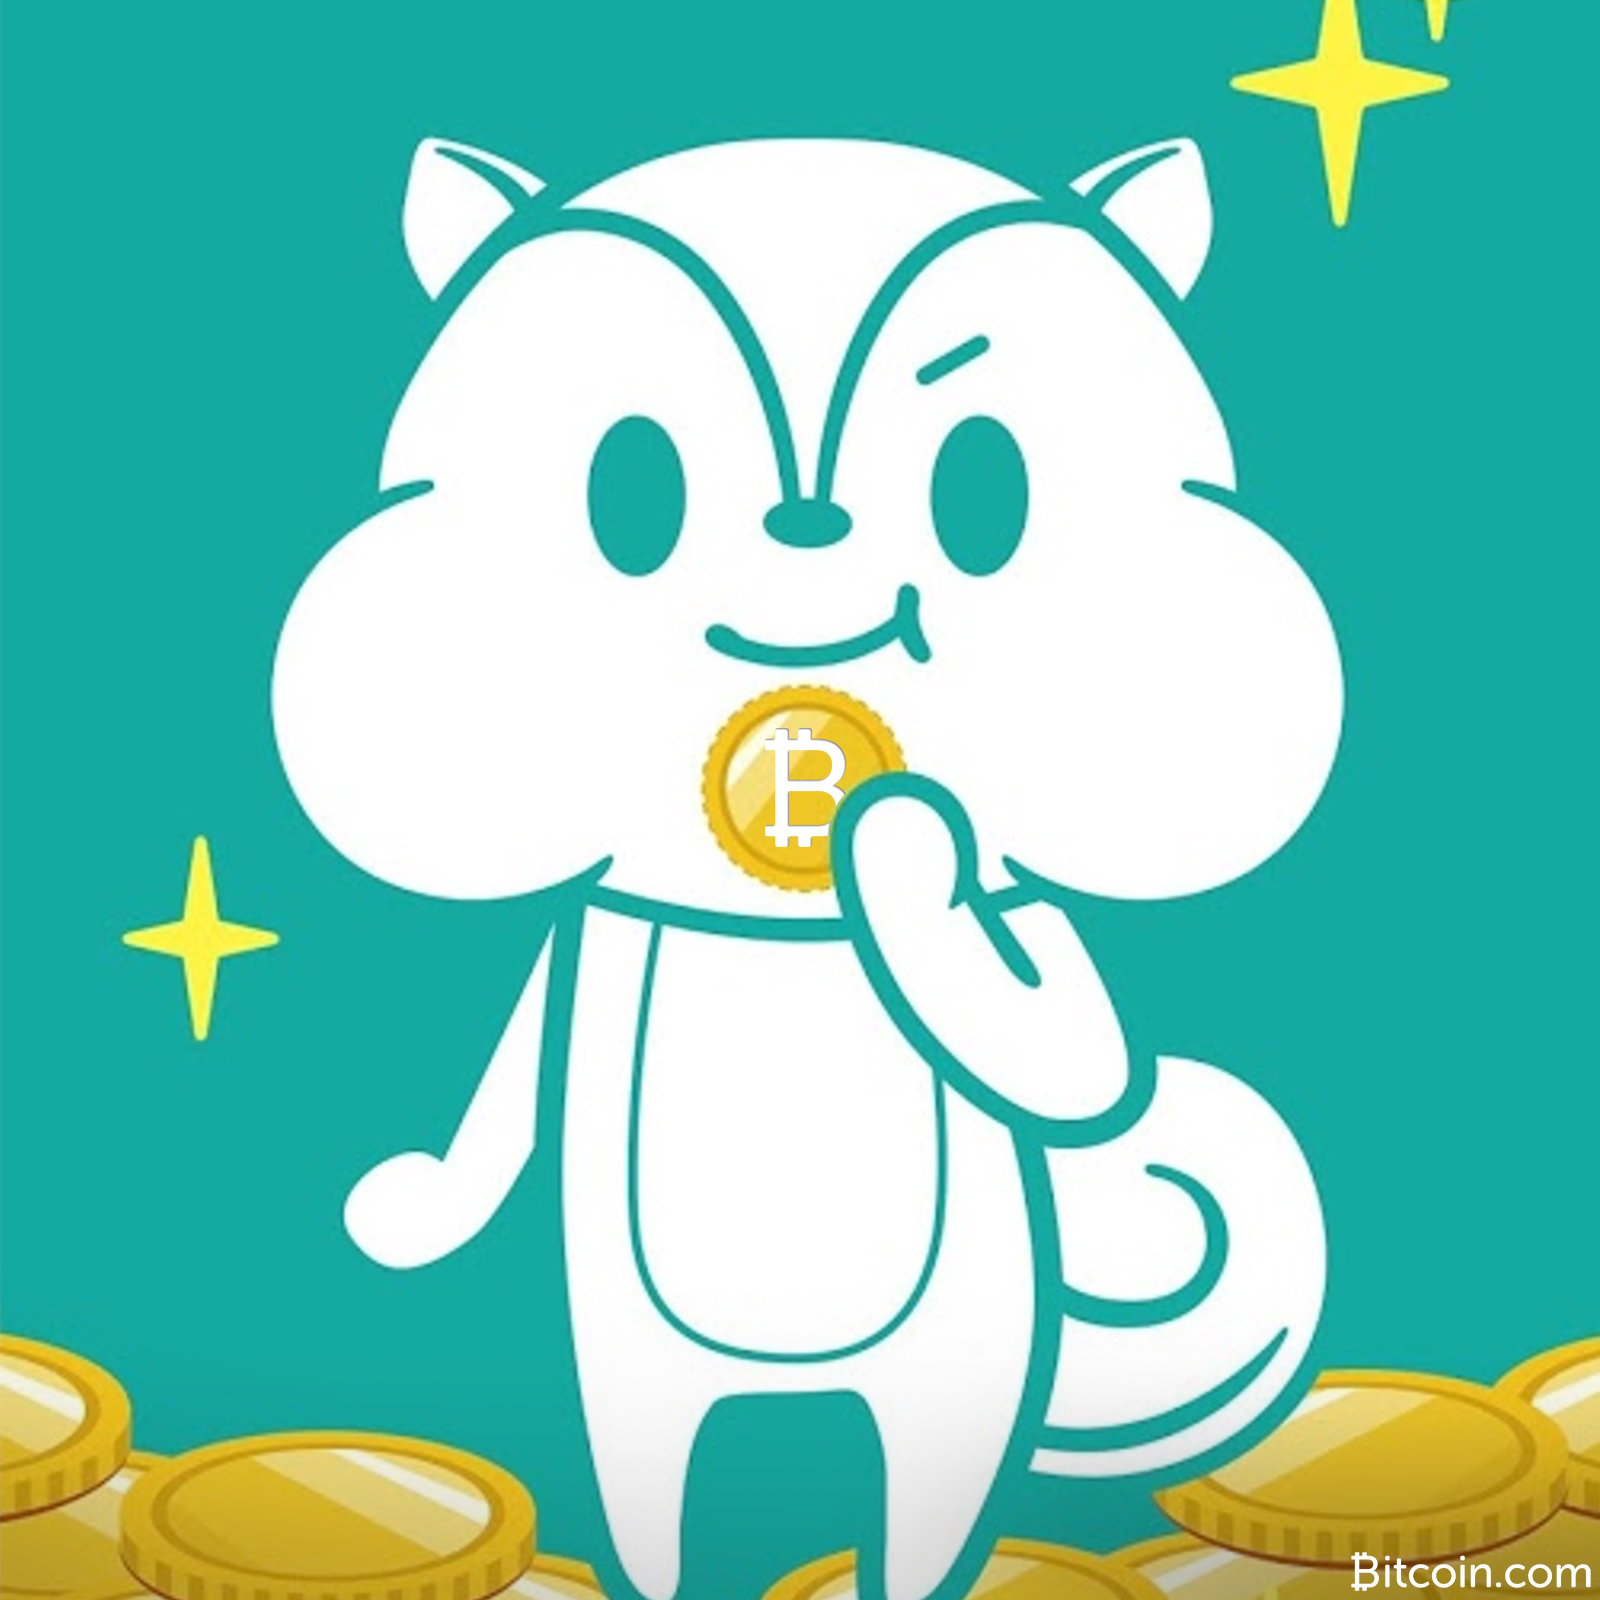 Japan's Largest Rewards Site Operator With 5 Million Users Launching Bitcoin Exchange